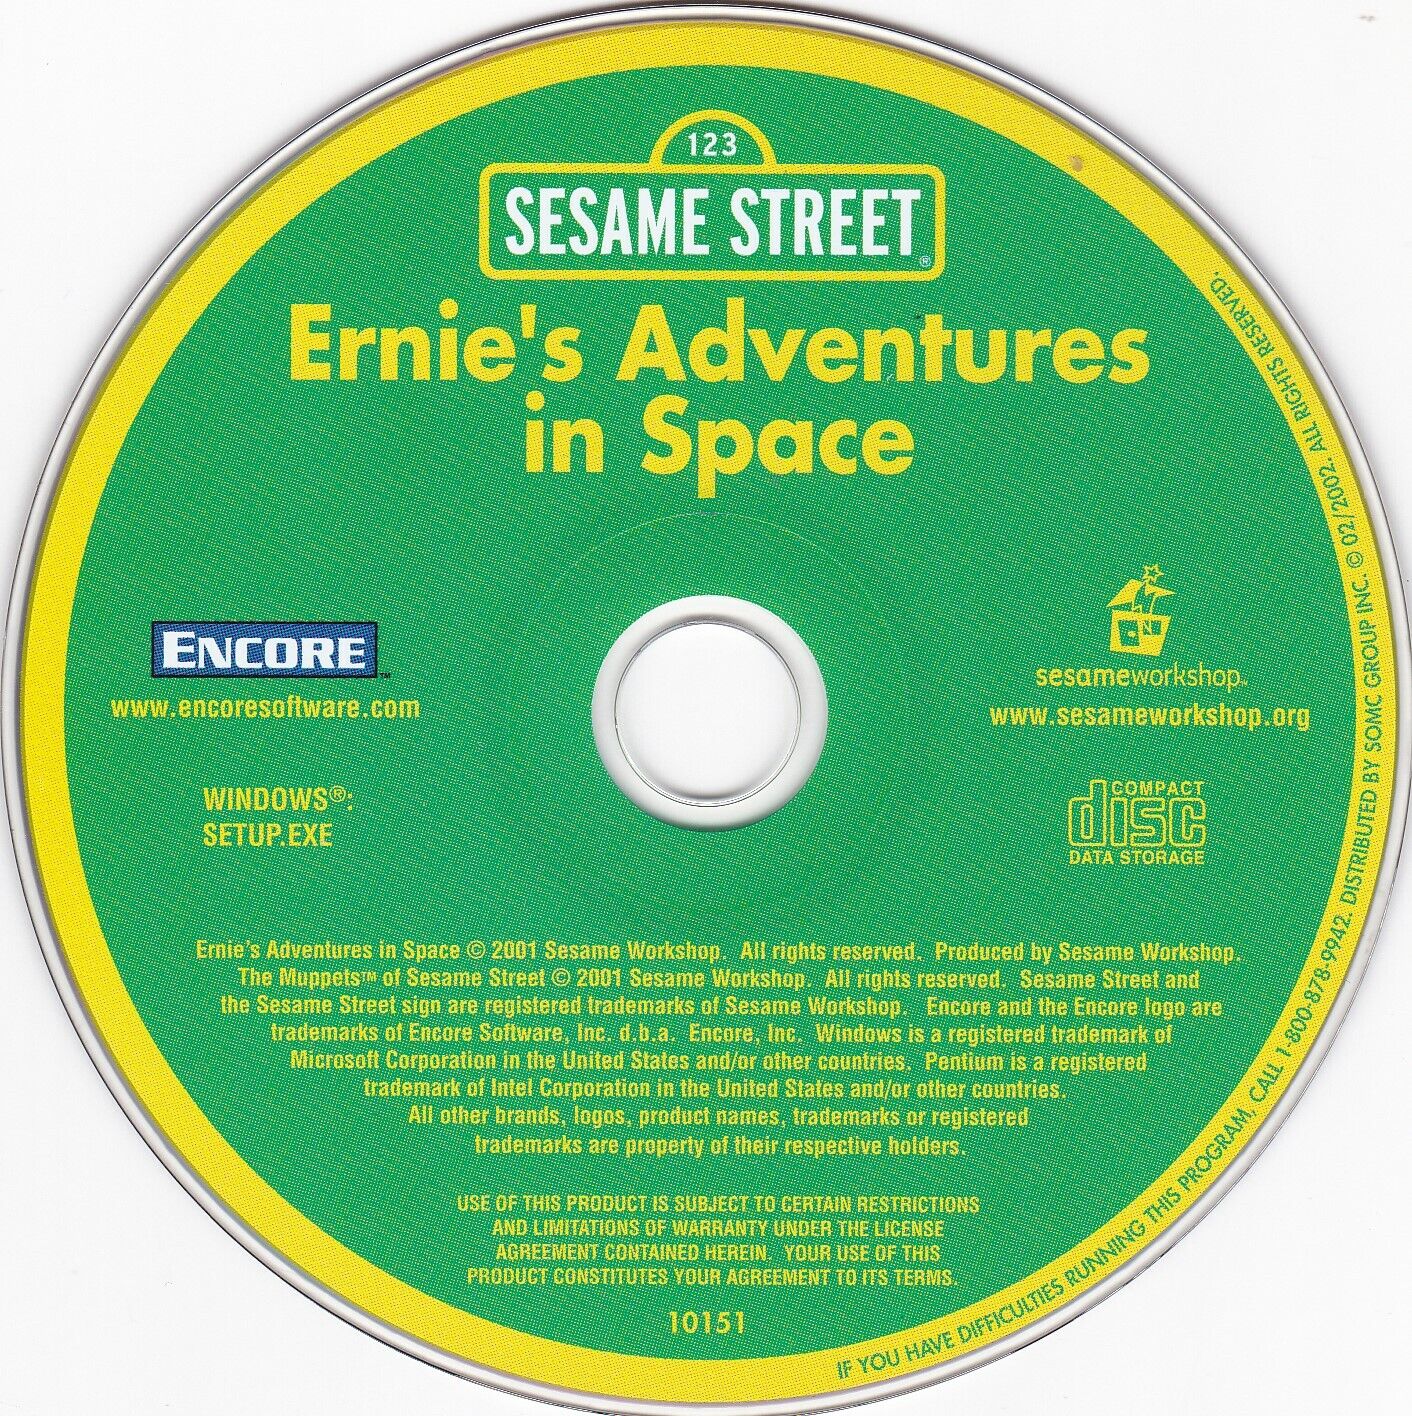 Sesame Street Ernie's Adventures in Space (PC, Windows, 2001) *DISC ONLY*